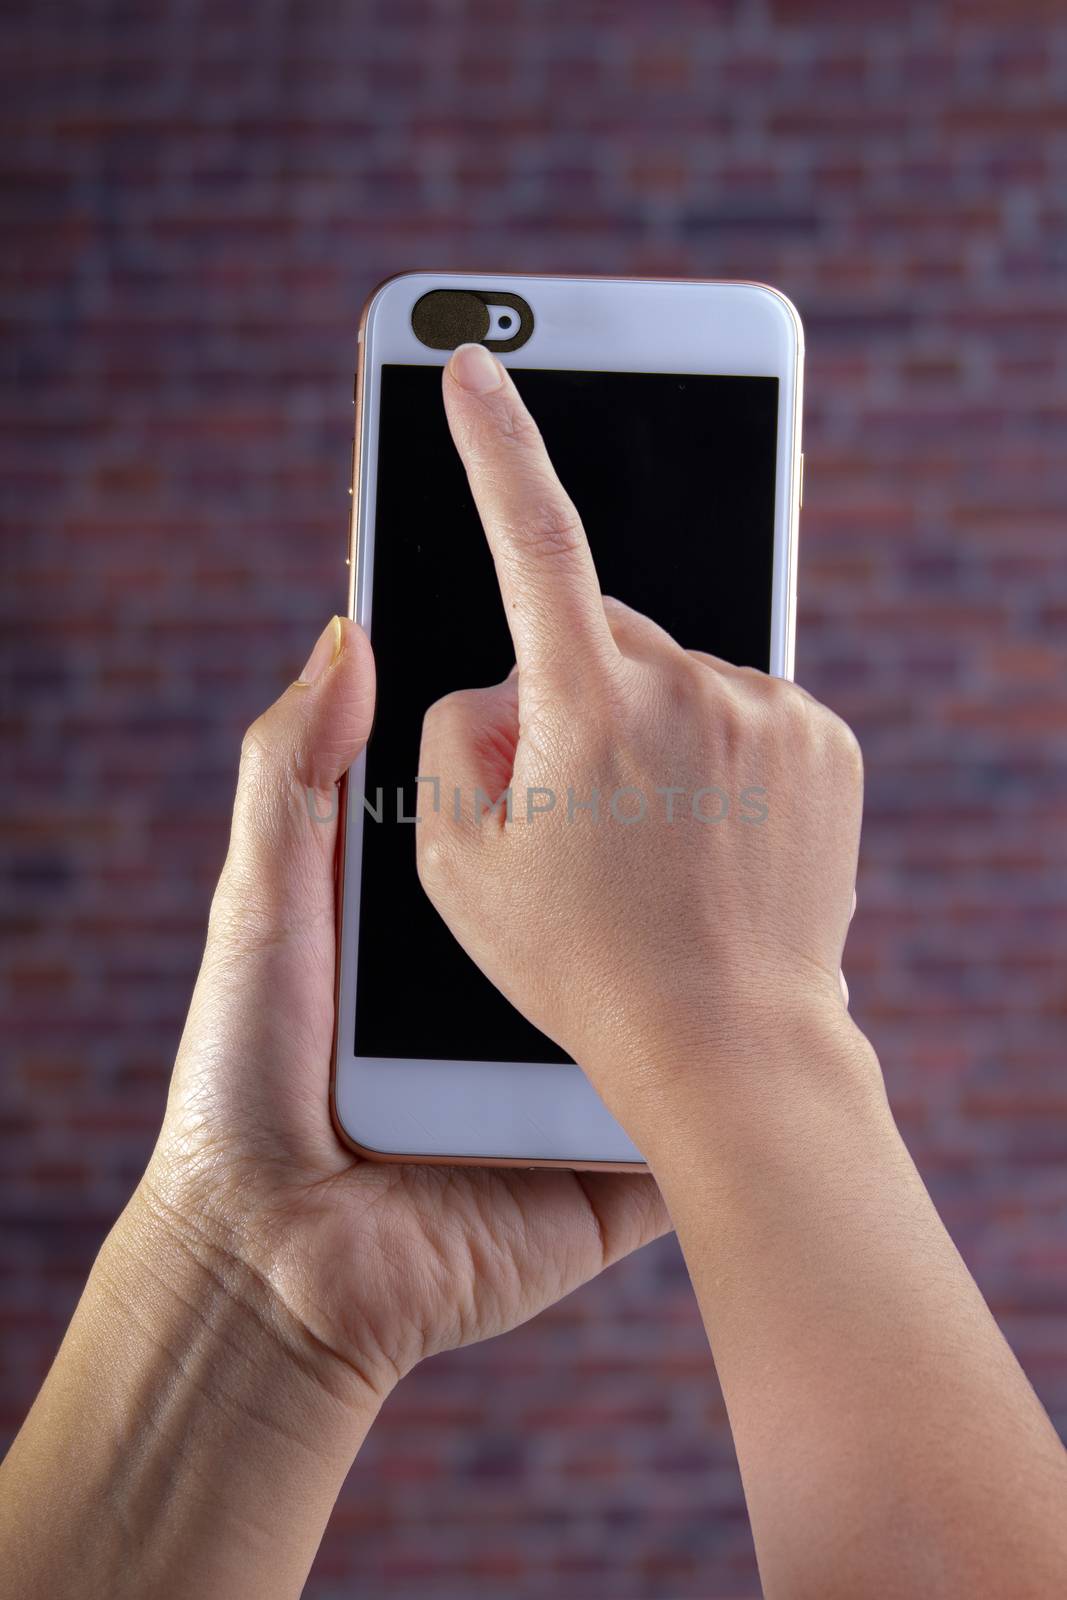 Smart phone camera privacy cover slide, for front camera cover for smart device hand hold on a red brick background